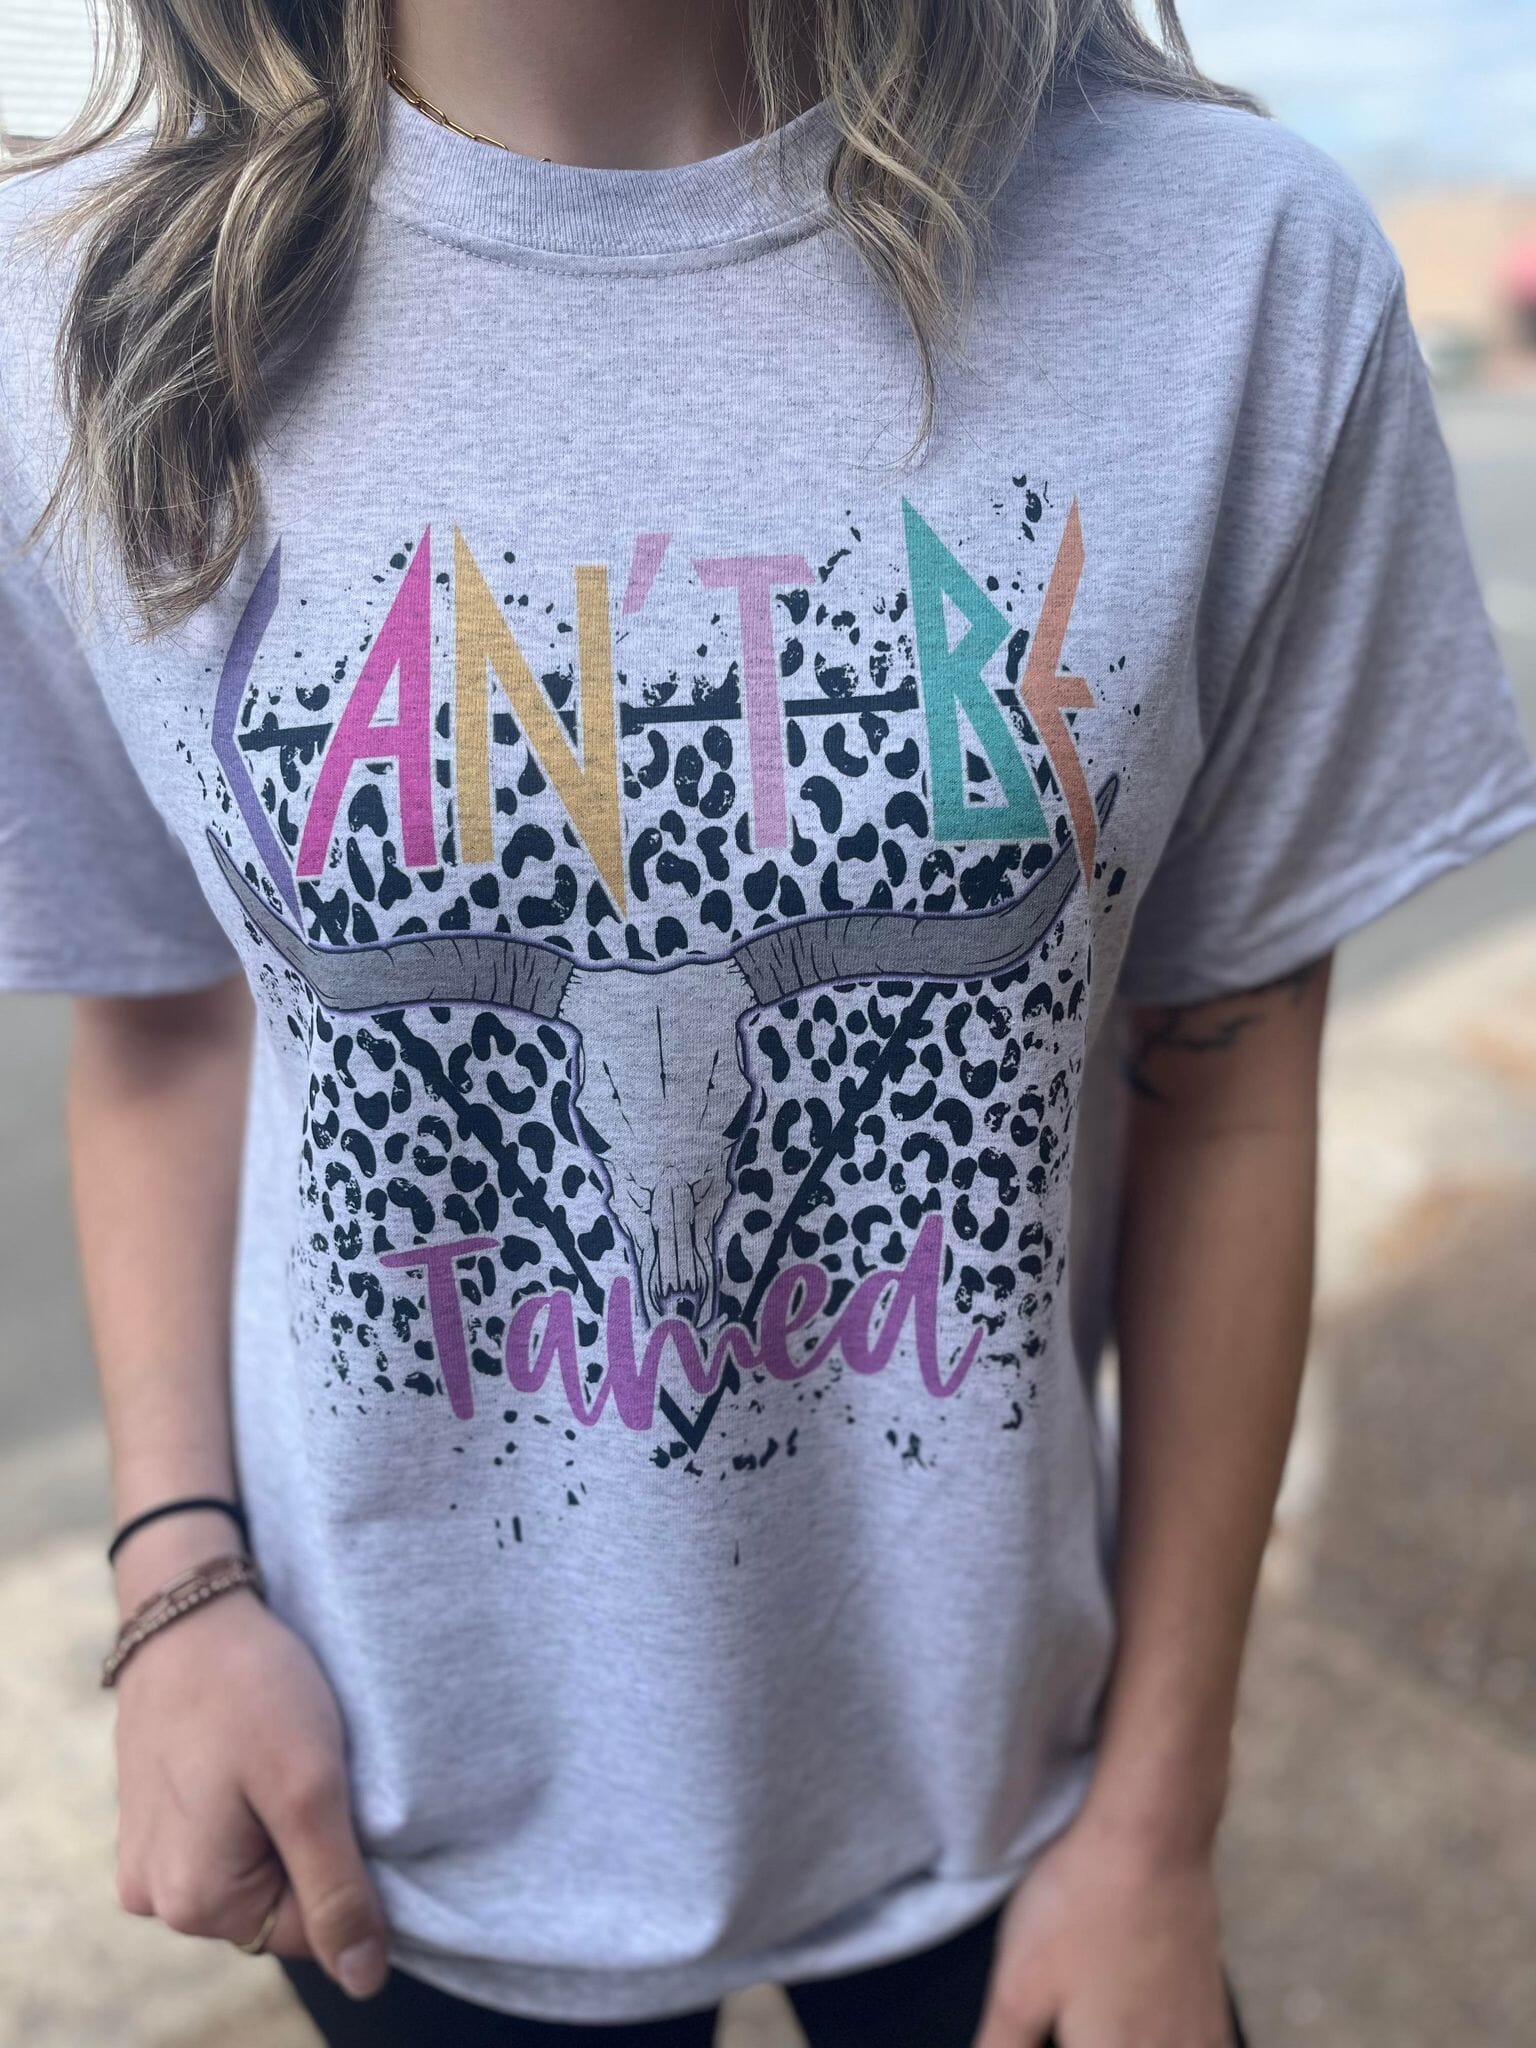 Can't Be Tamed Tee ask apparel wholesale 